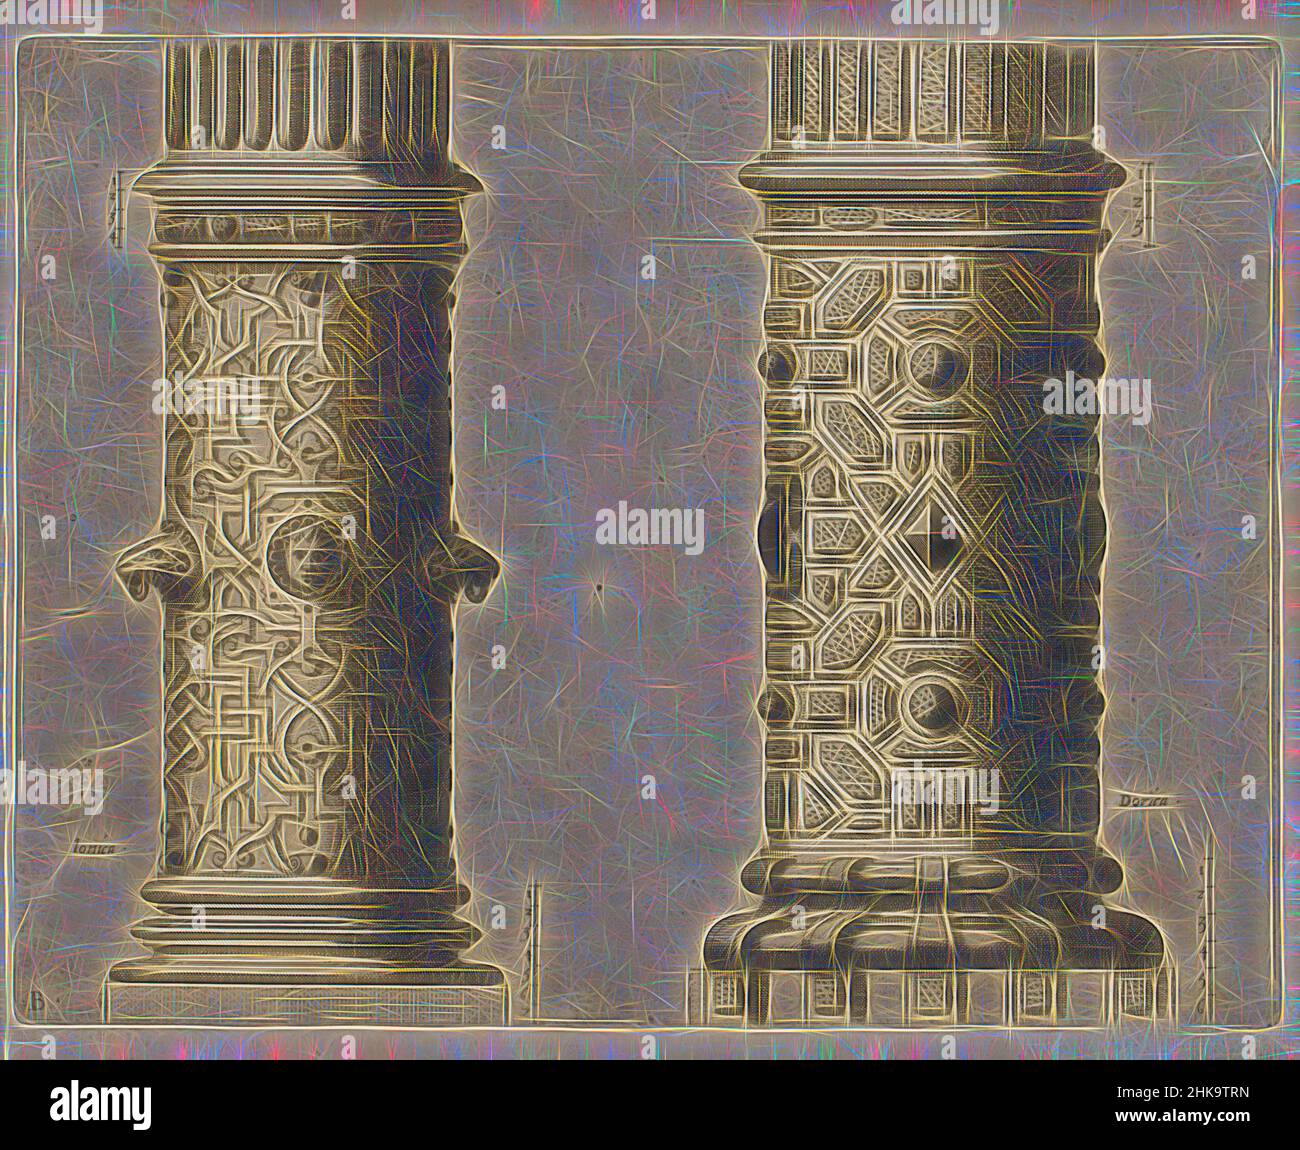 Inspired by Two 'columnae caelatae', Den eersten boeck ghemaeckt op de twee Colomnen Dorica en Ionica, Two 'columnae caelatae'. On the left the lower part of a column of the Ionic Order with moresques and mascarons. On the right the lower part of a column of the Doric Order with stylized bossage, Reimagined by Artotop. Classic art reinvented with a modern twist. Design of warm cheerful glowing of brightness and light ray radiance. Photography inspired by surrealism and futurism, embracing dynamic energy of modern technology, movement, speed and revolutionize culture Stock Photo